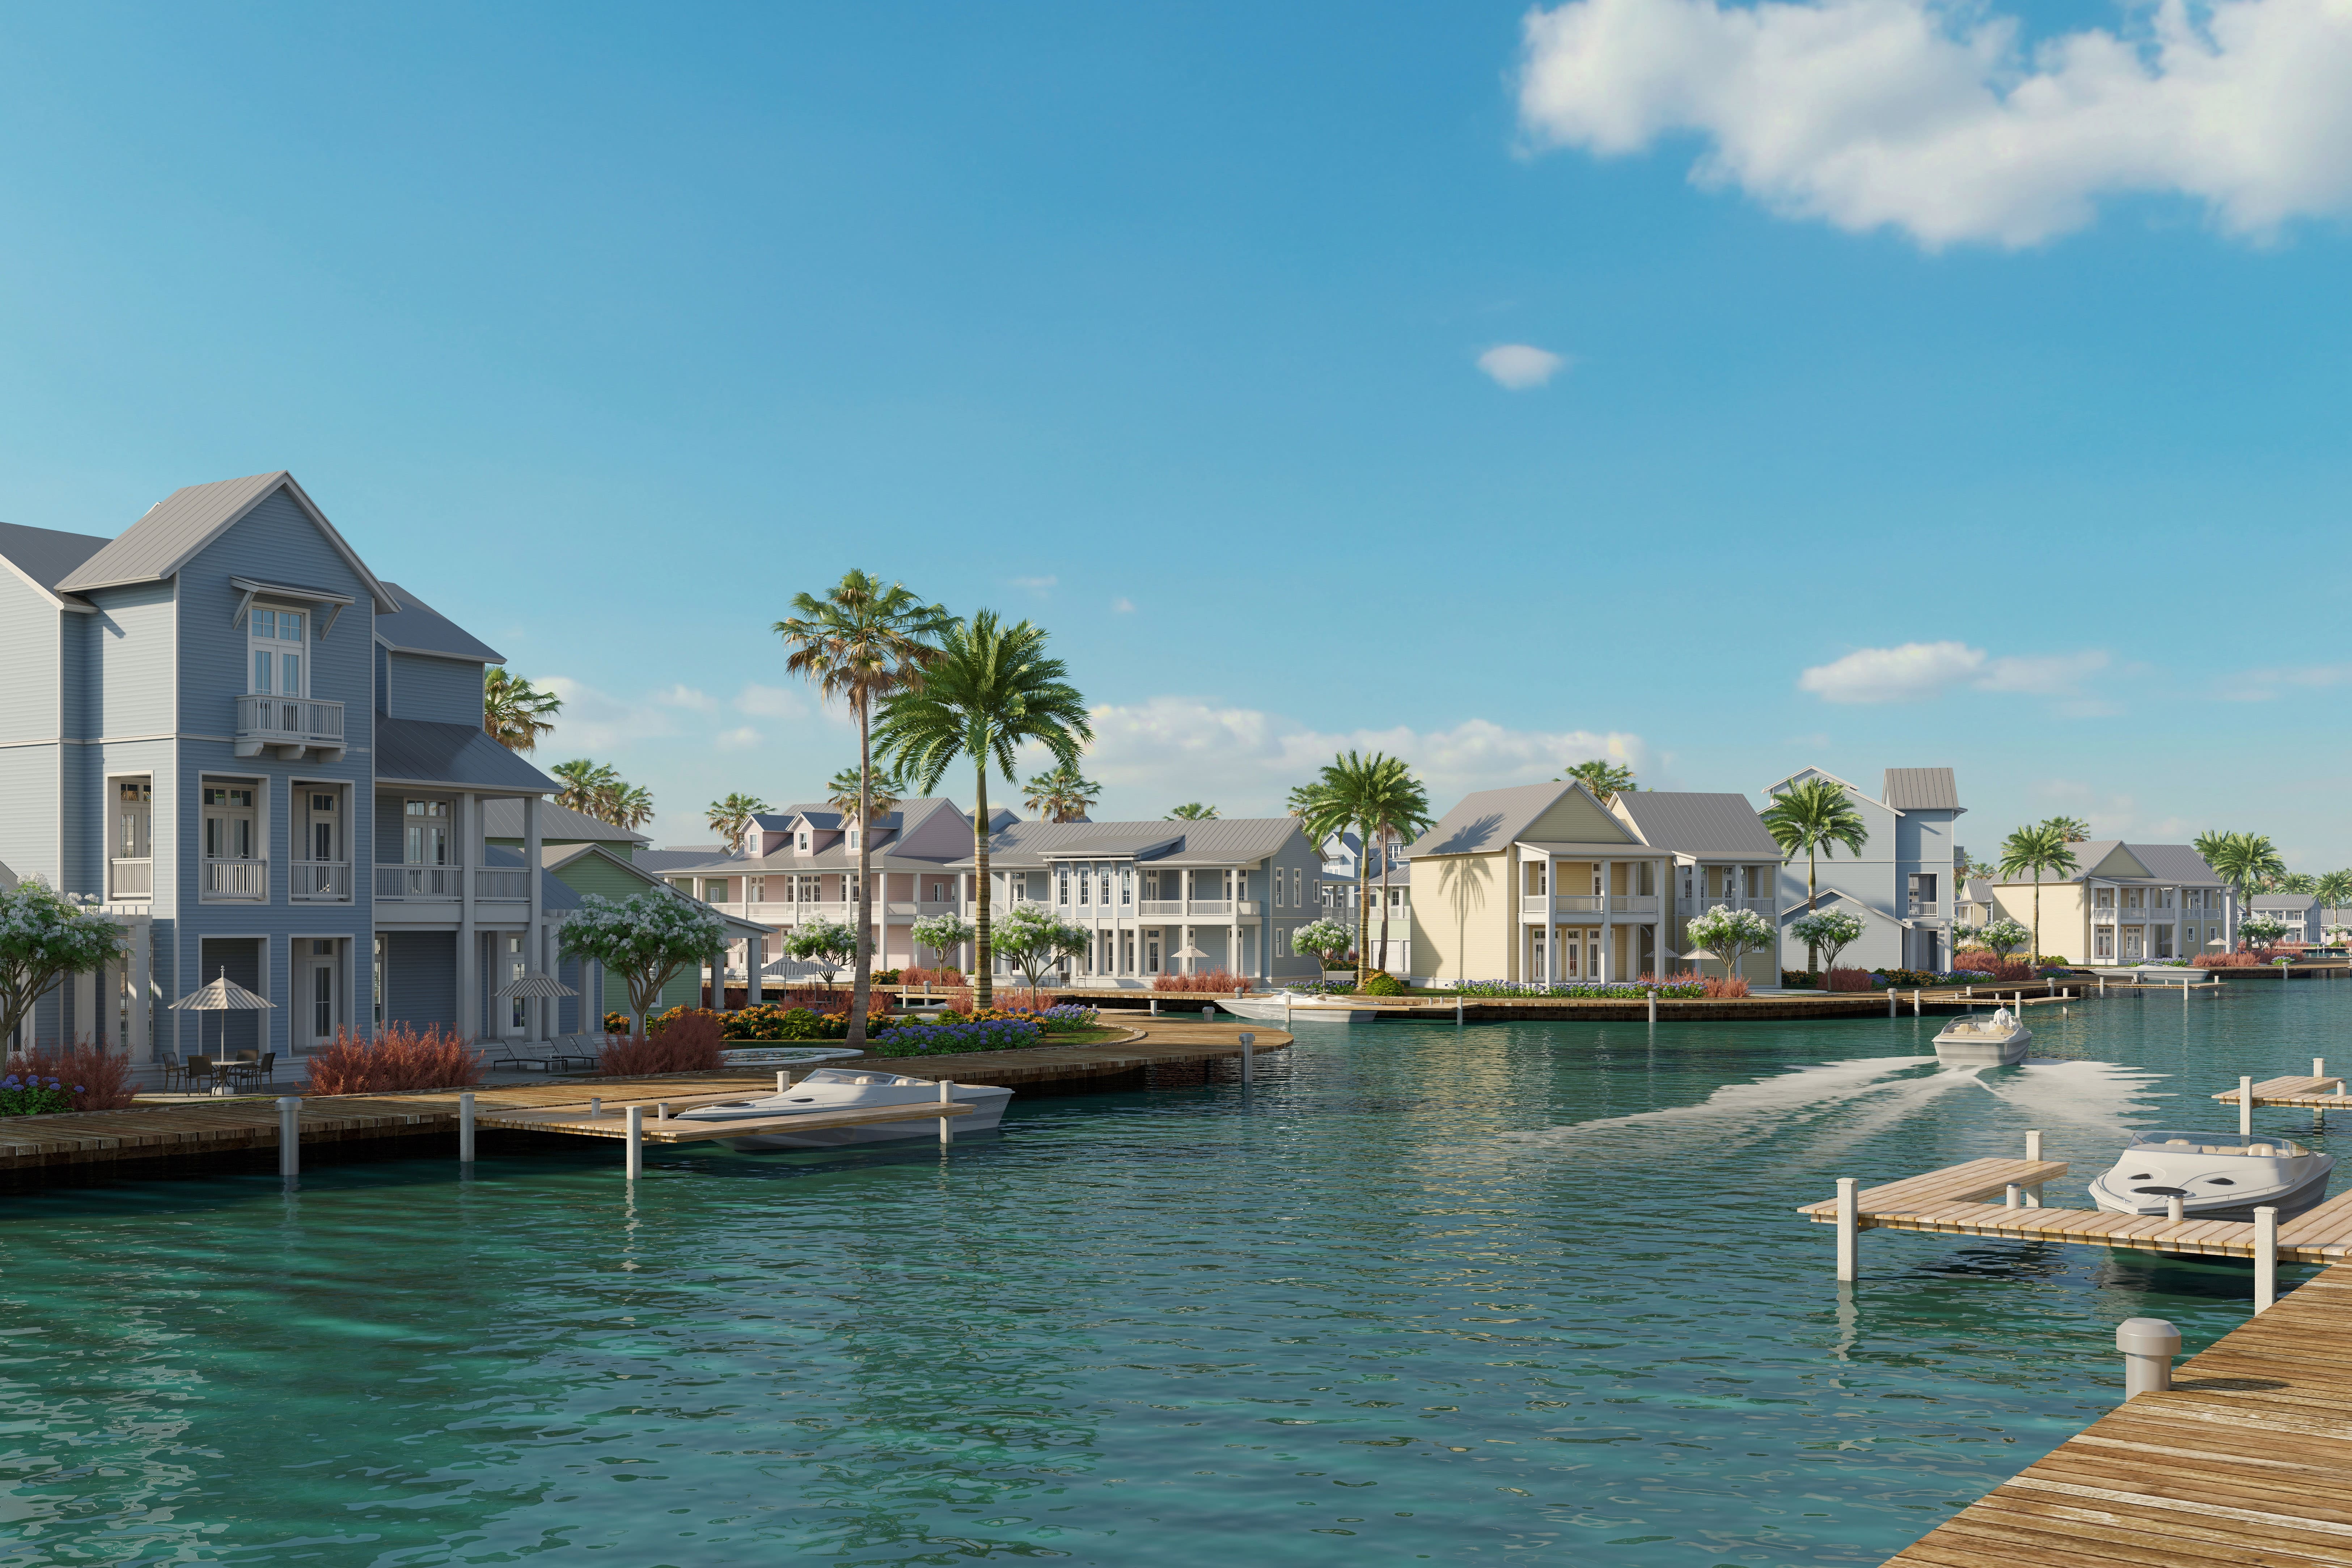 Ground view of the waterfront homes in Rockport, TX